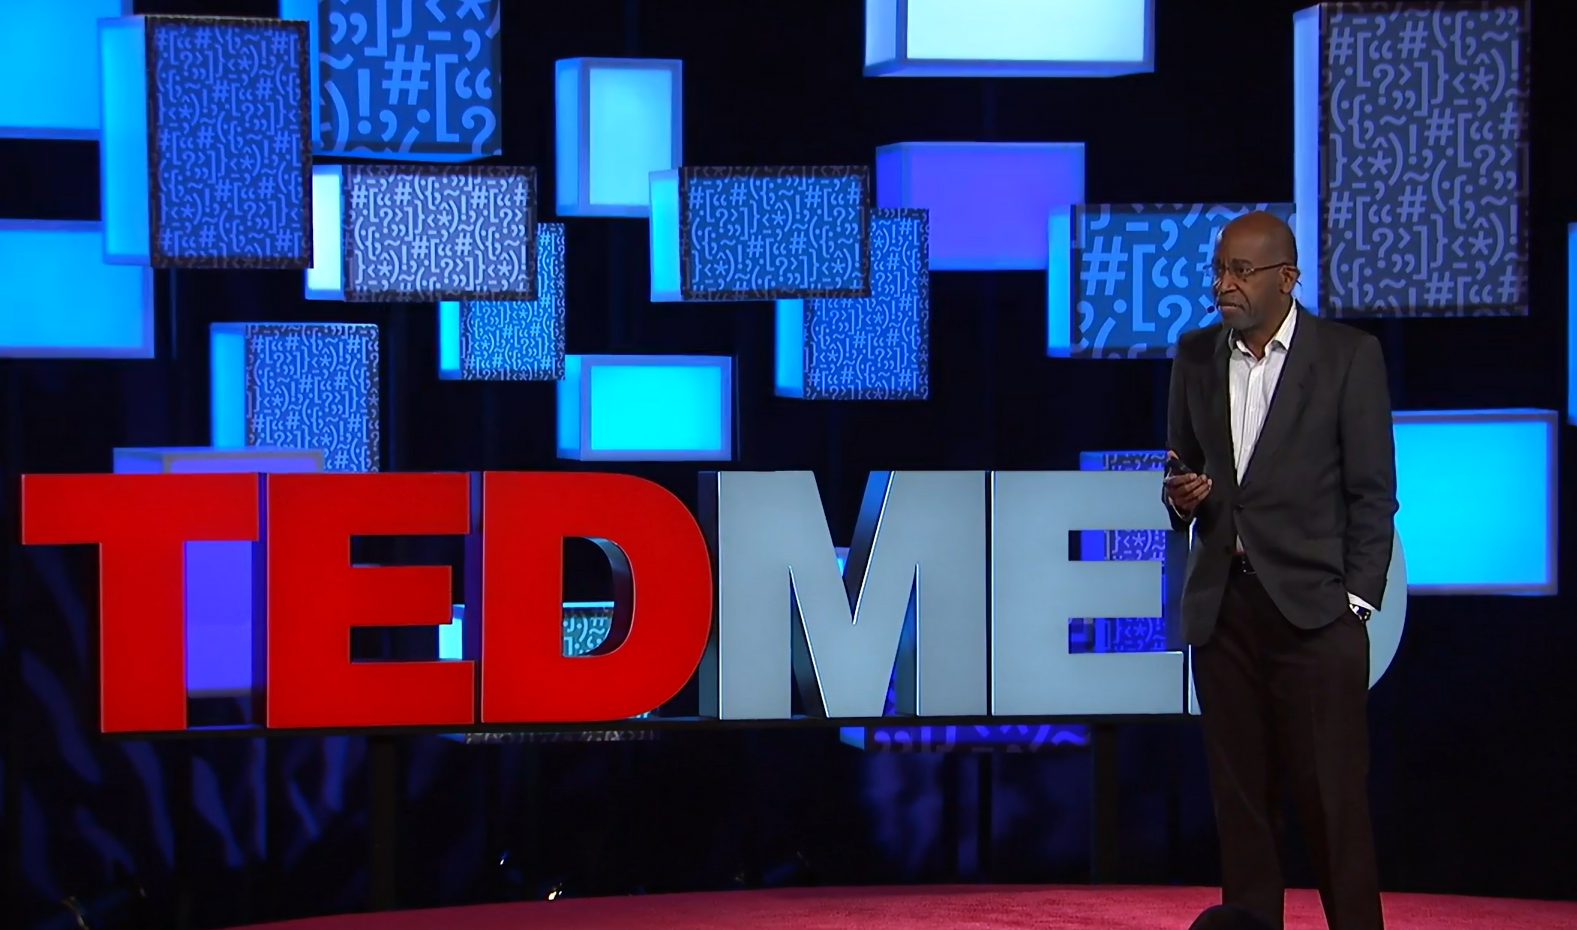 David R. Williams, a Black man, stands on a red carpet in front of a TEDMED screen. He is wearing a black suit, holding a clicker, and speaking into a microphone. 